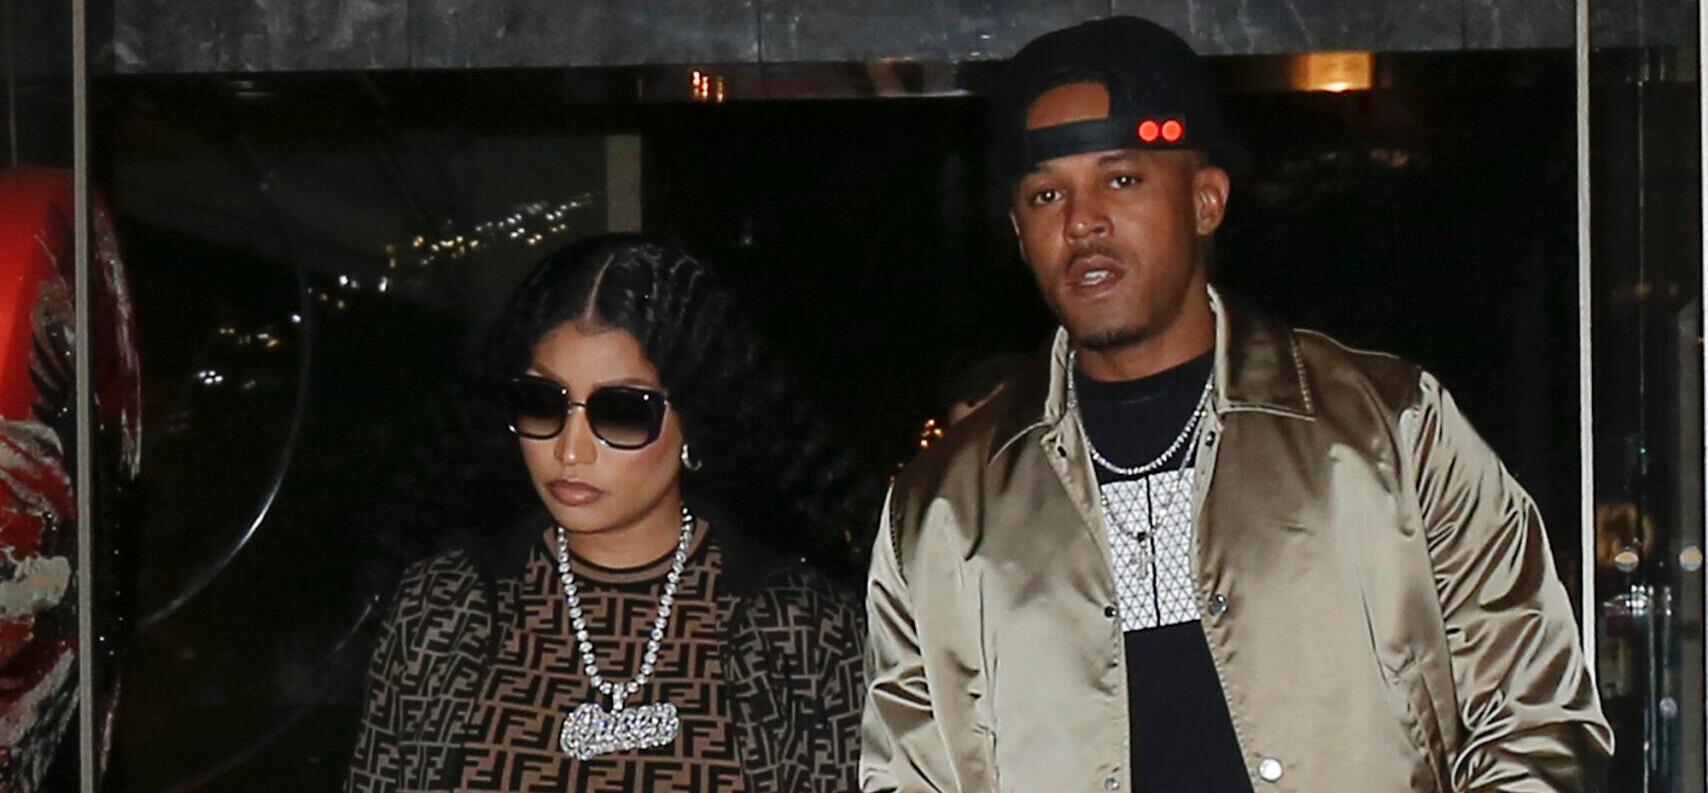 Nicki Minaj Ordered To Pay $500k In Damages Over Husband’s Alleged Assault Of Security Guard